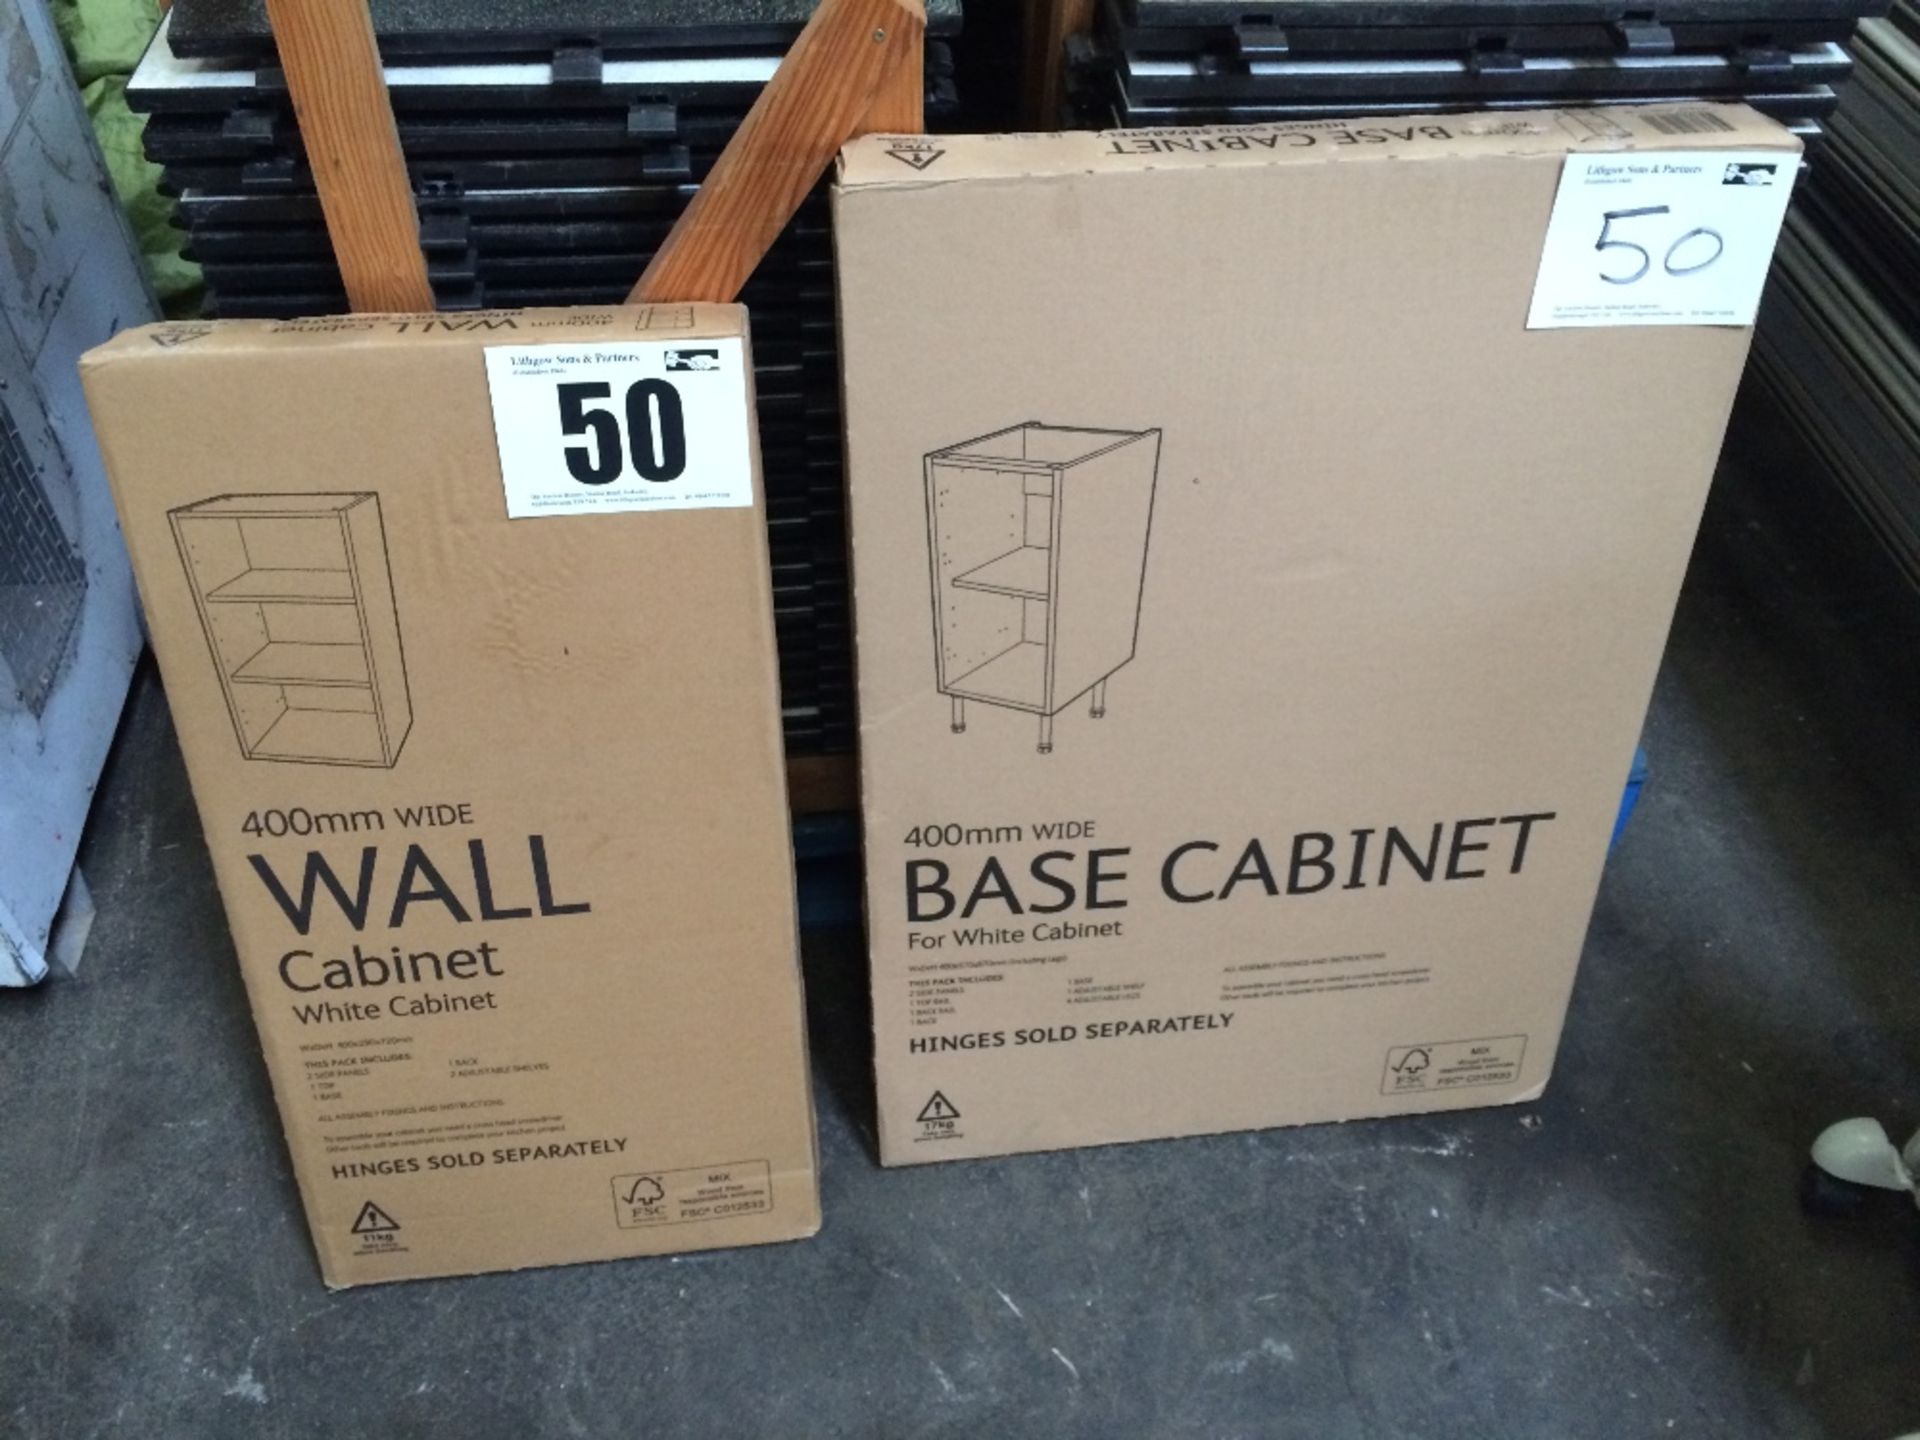 B&Q 400mm wide base cabinet (for white cabinet), 400mm x 570mm x 870mm (including legs) (boxed)